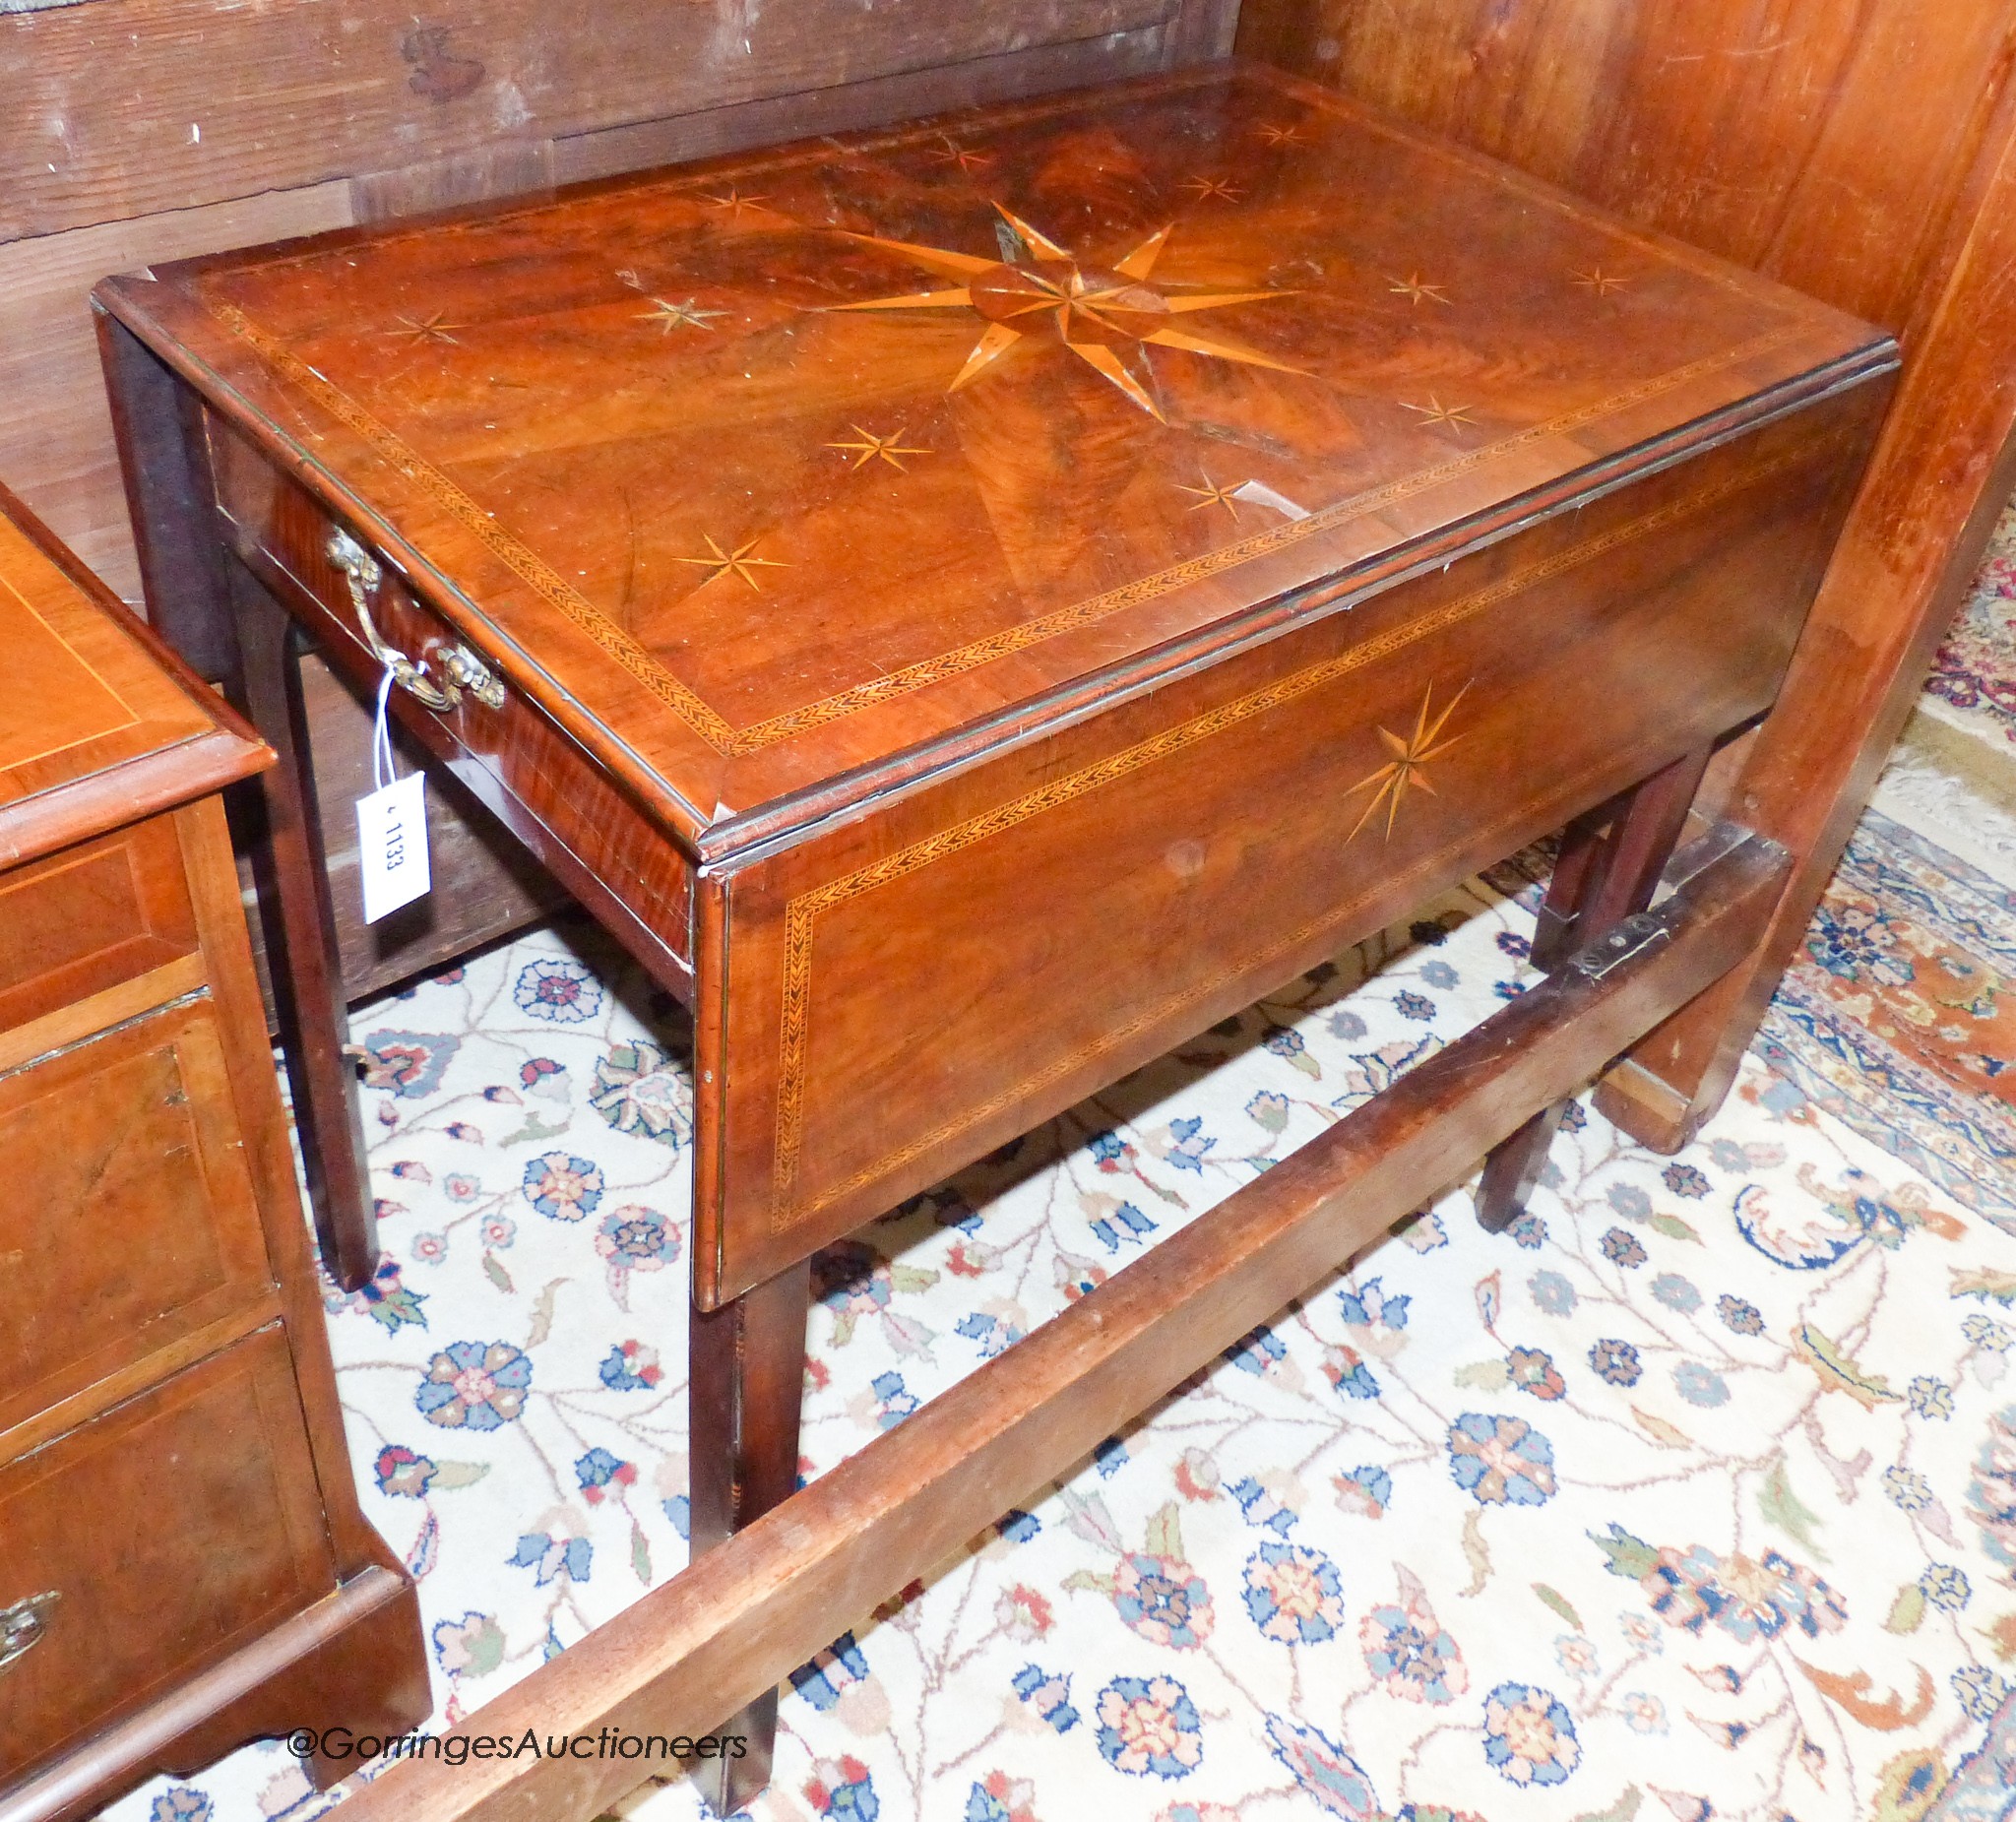 A George III mahogany Pembroke table, inlaid with star motifs, width 78cm, depth 51cm, height 71cm